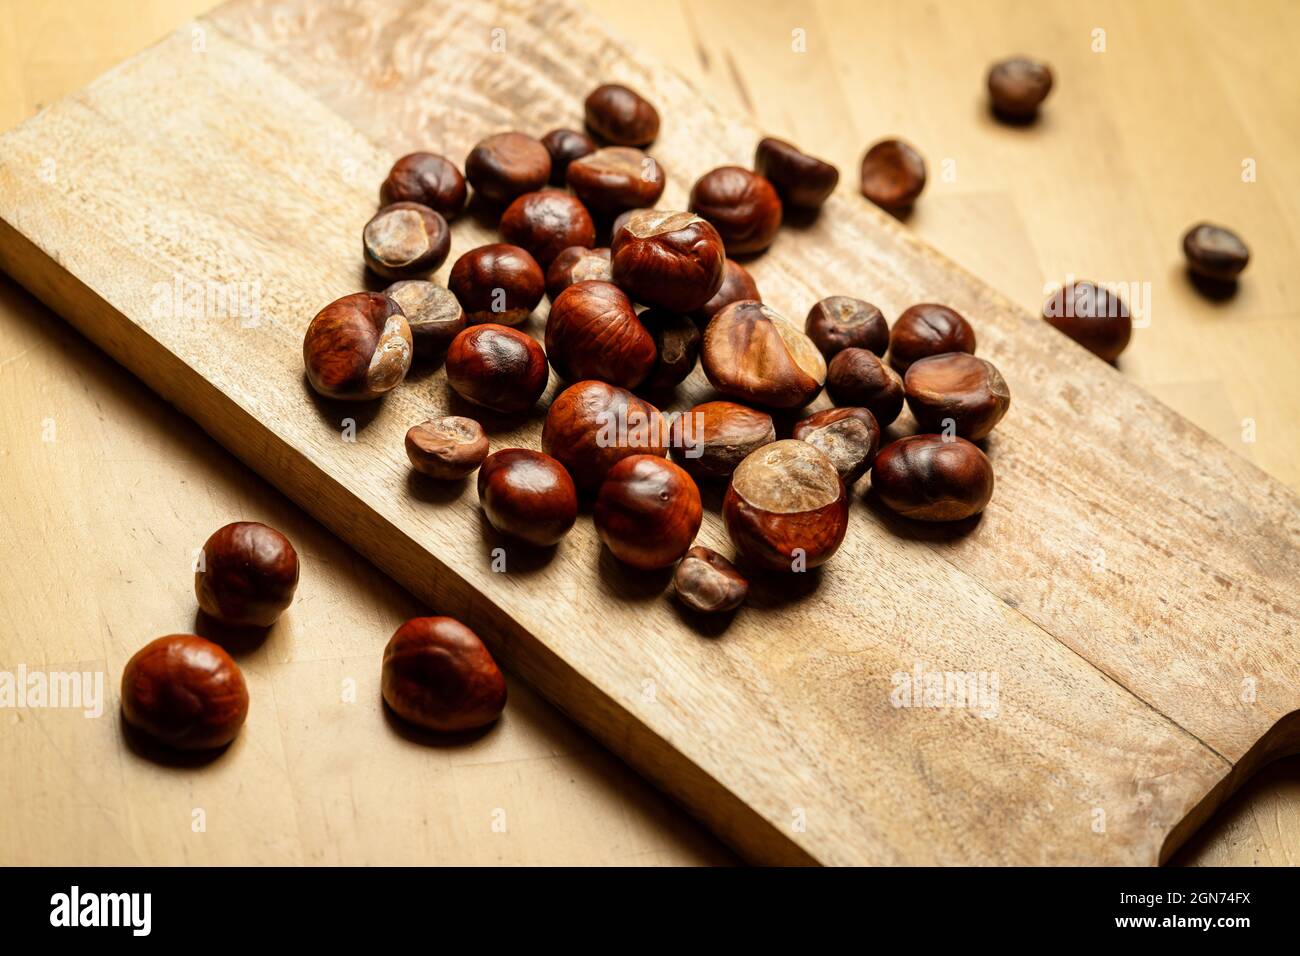 Fresh sweet edible chestnuts on wooden table Stock Photo